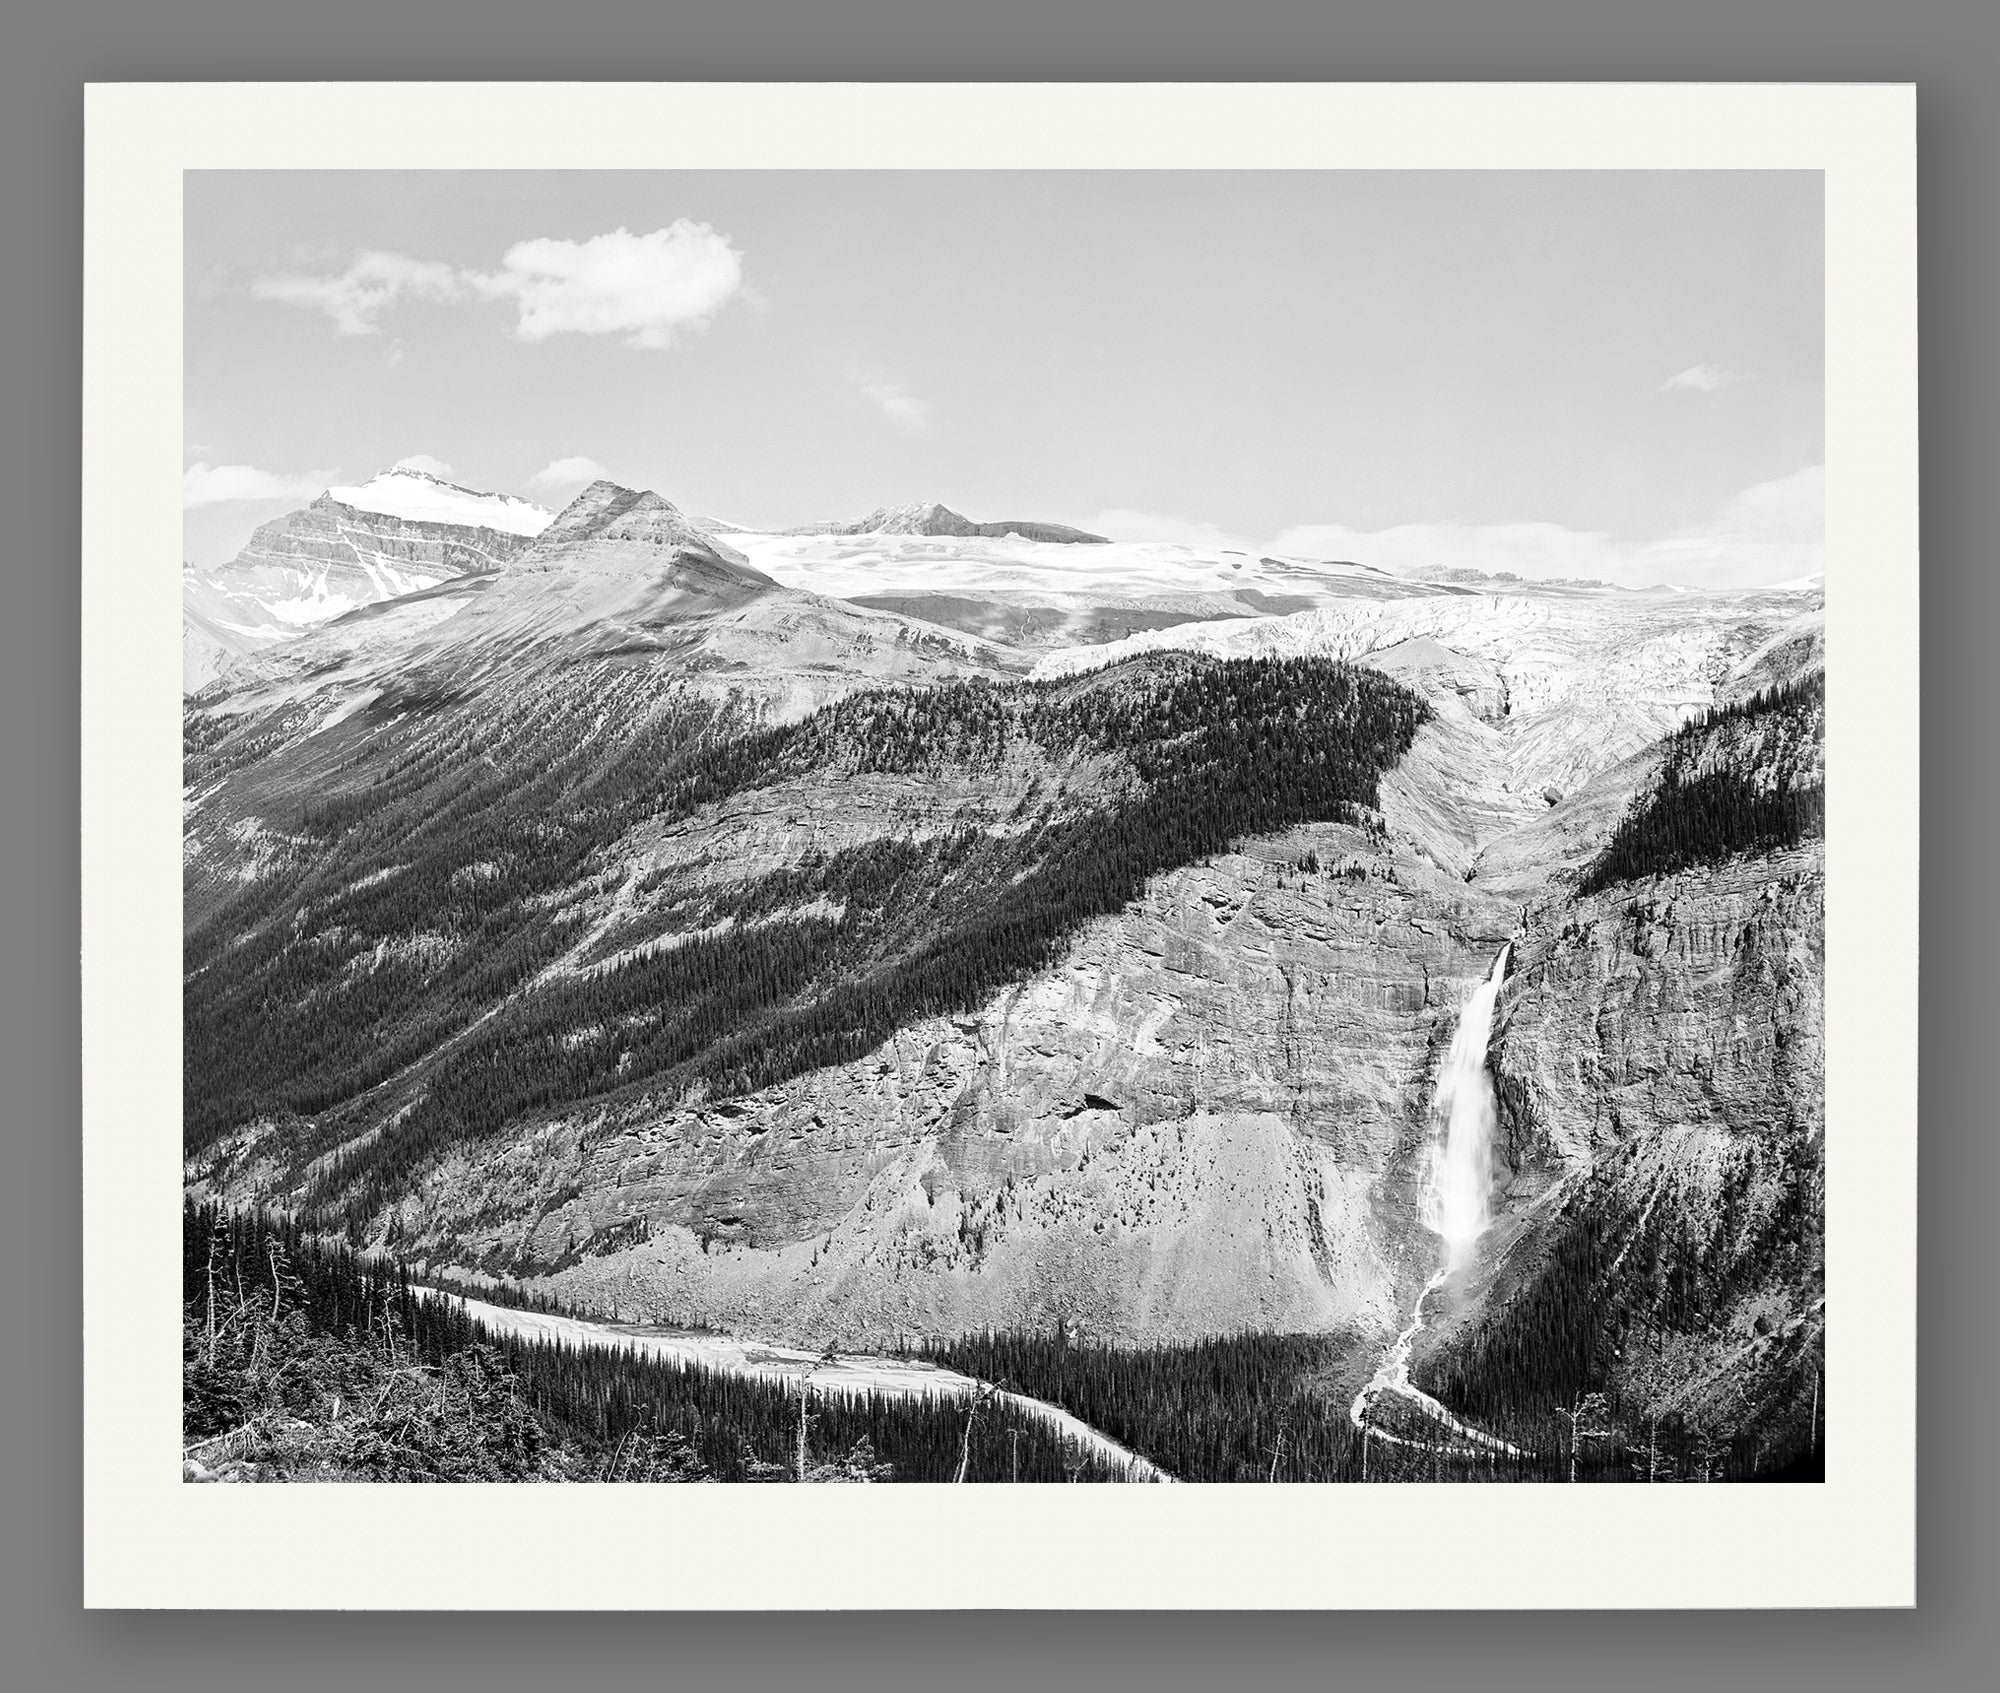 A paper print reproduction of vintage photography featuring Yoho Valley in British Columbia